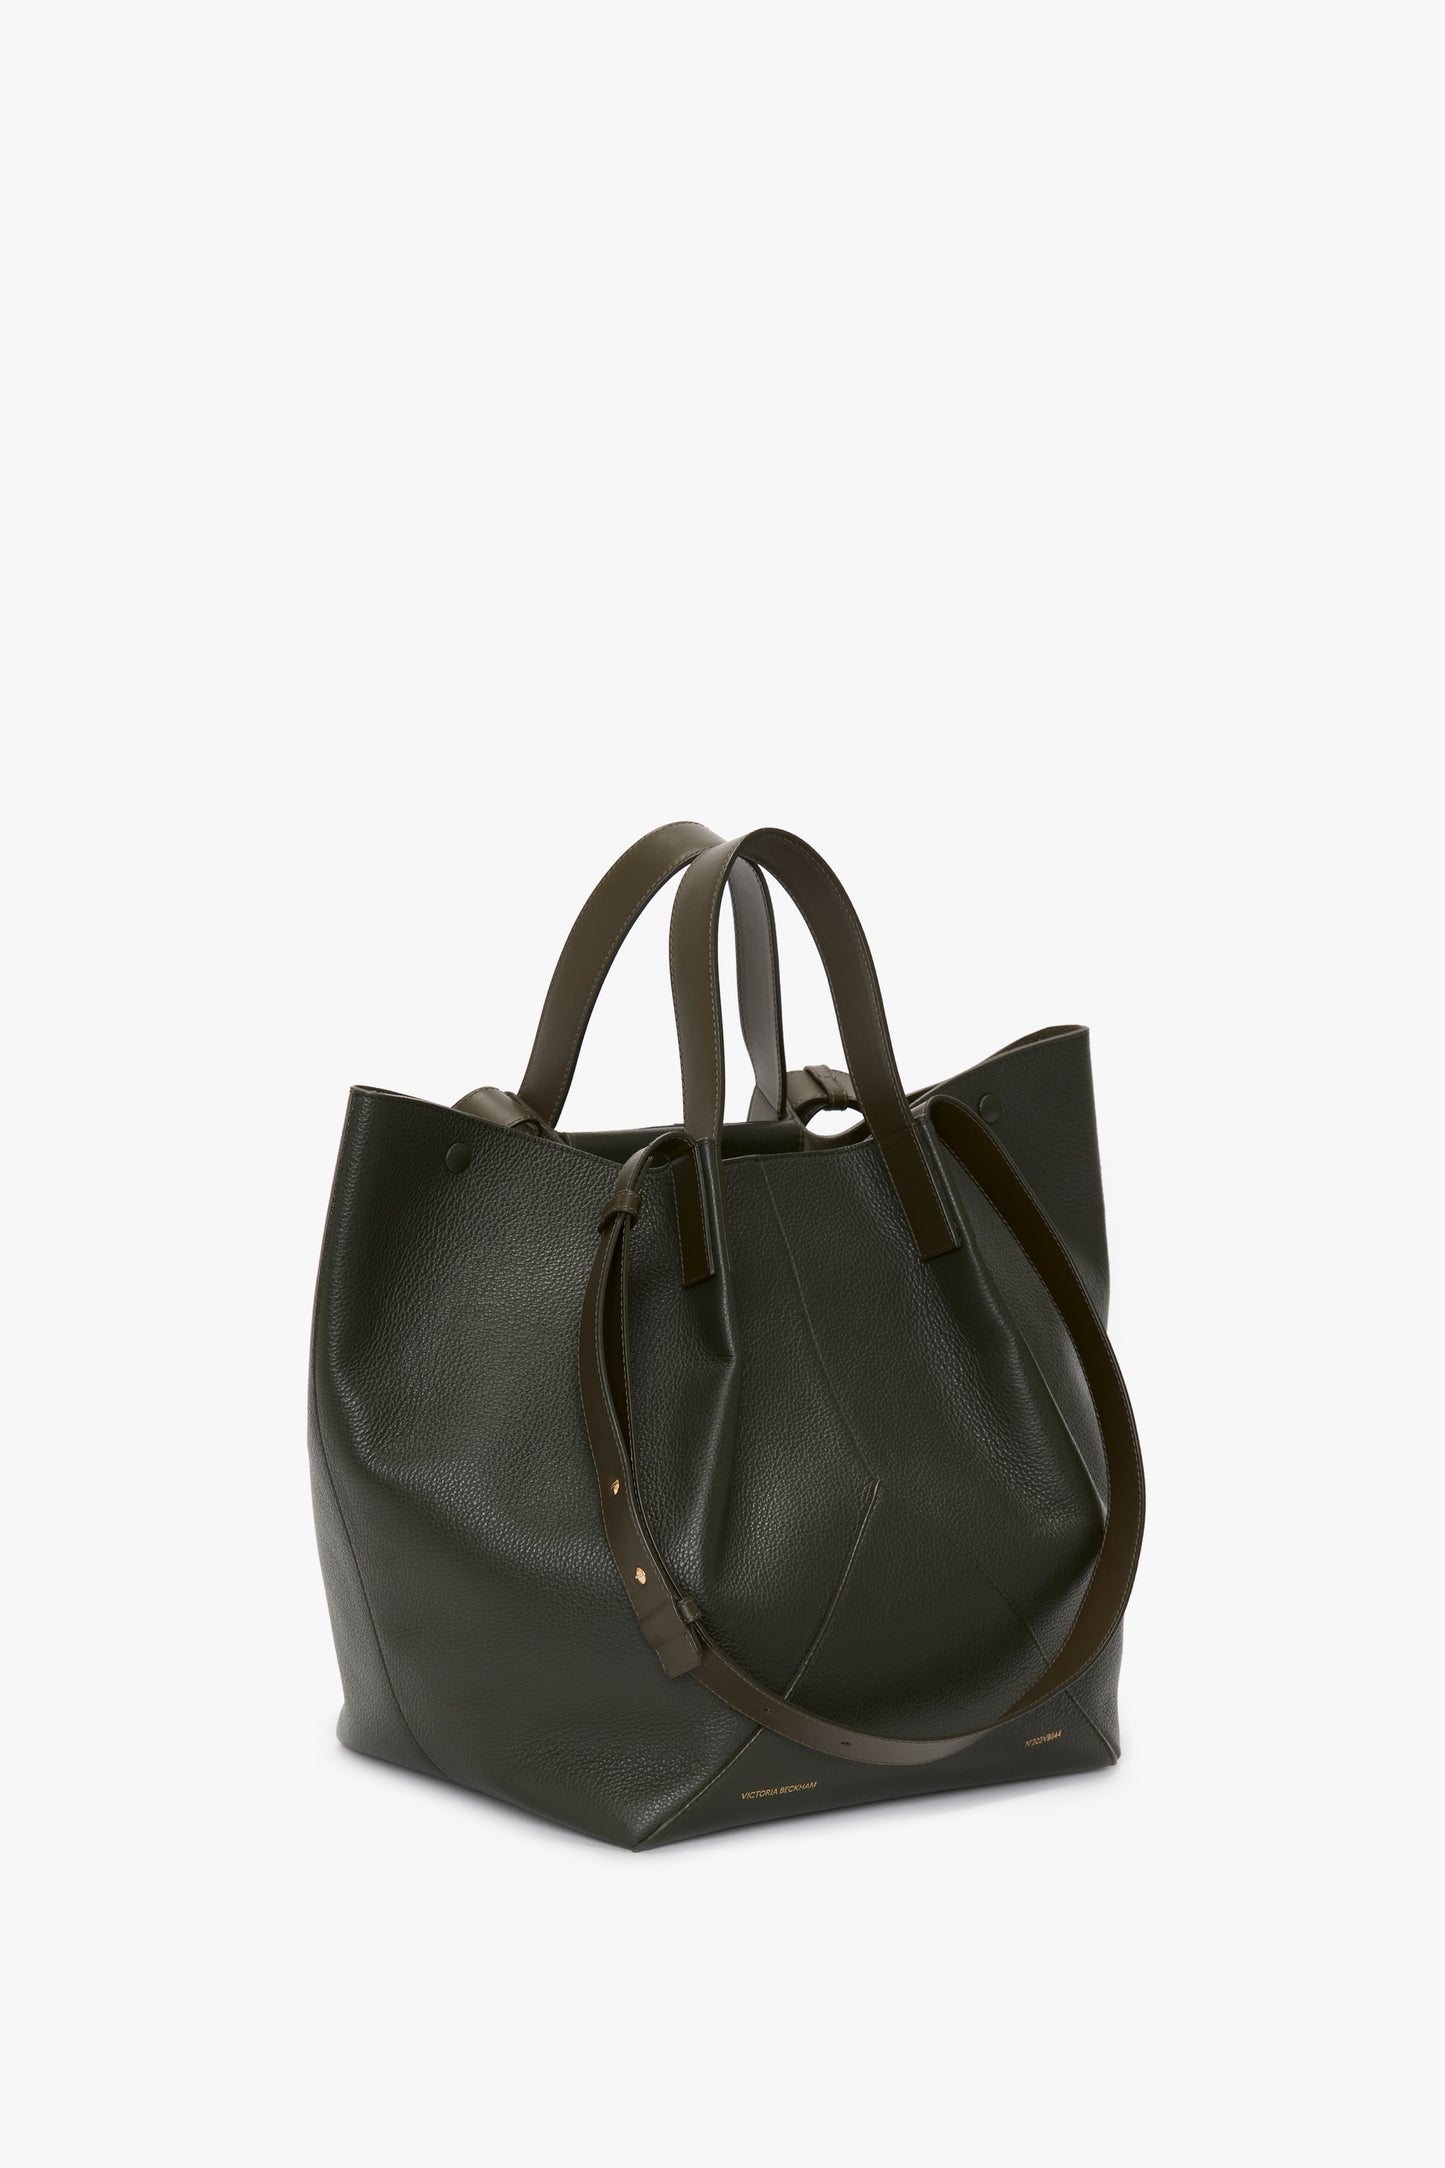 The Jumbo Tote In Loden Leather